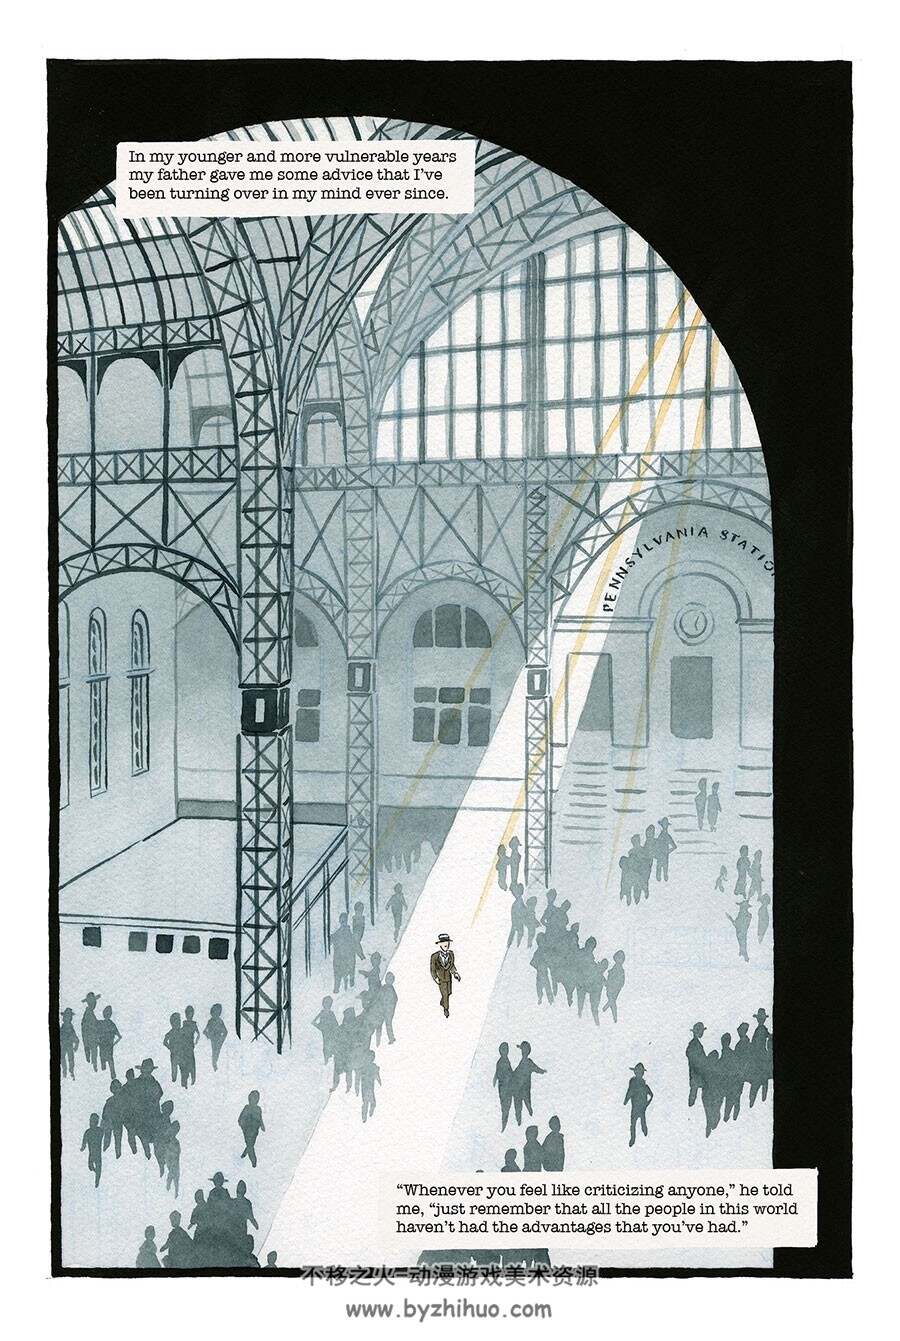 The Great Gatsby The Graphic Novel 漫画 百度网盘下载